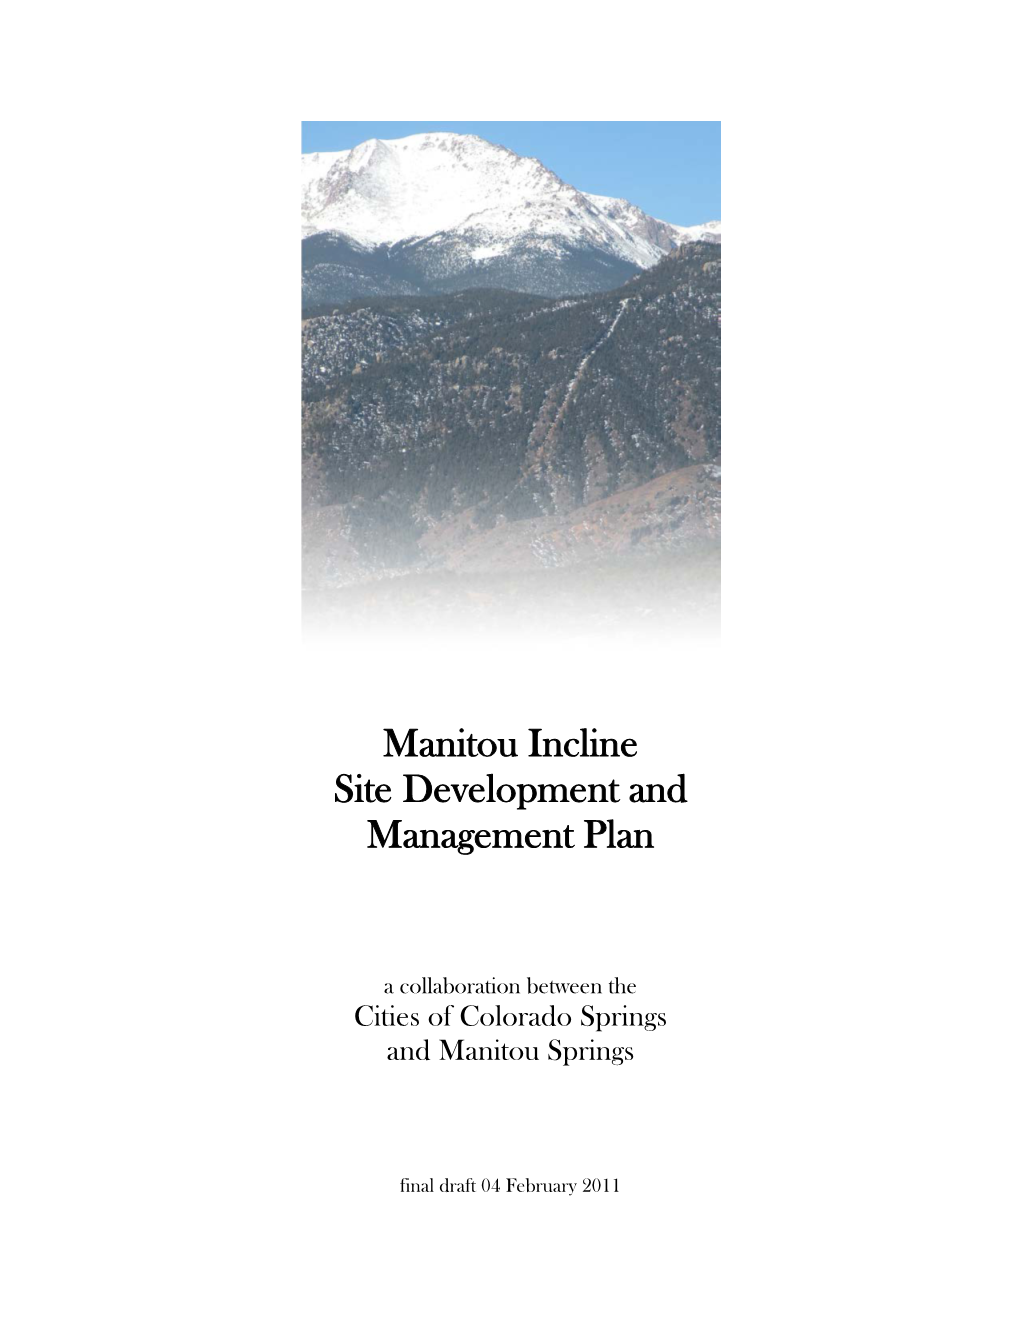 Manitou Incline Site Development and Management Plan